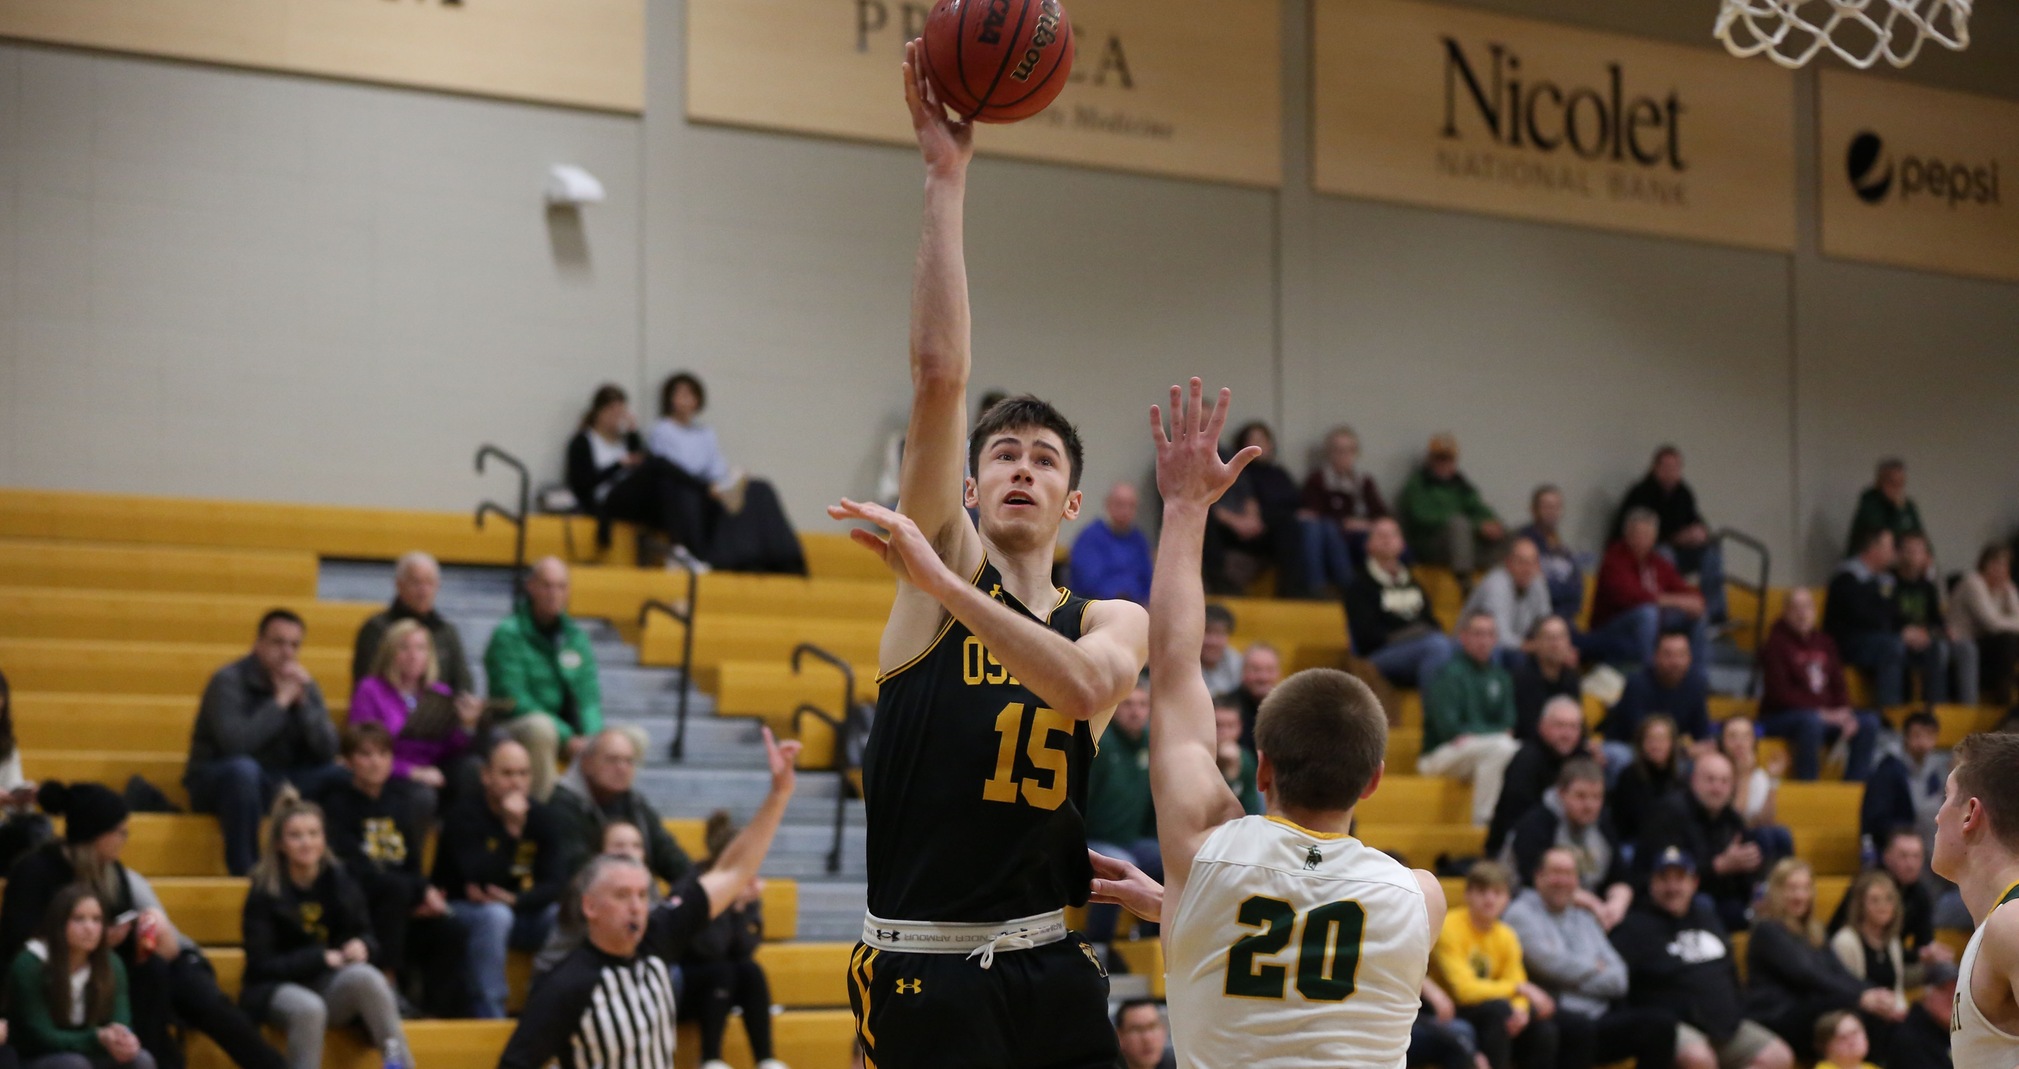 Adam Fravert scored 18 points, including five 3-point baskets, with 10 rebounds and six assists against the Green Knights.